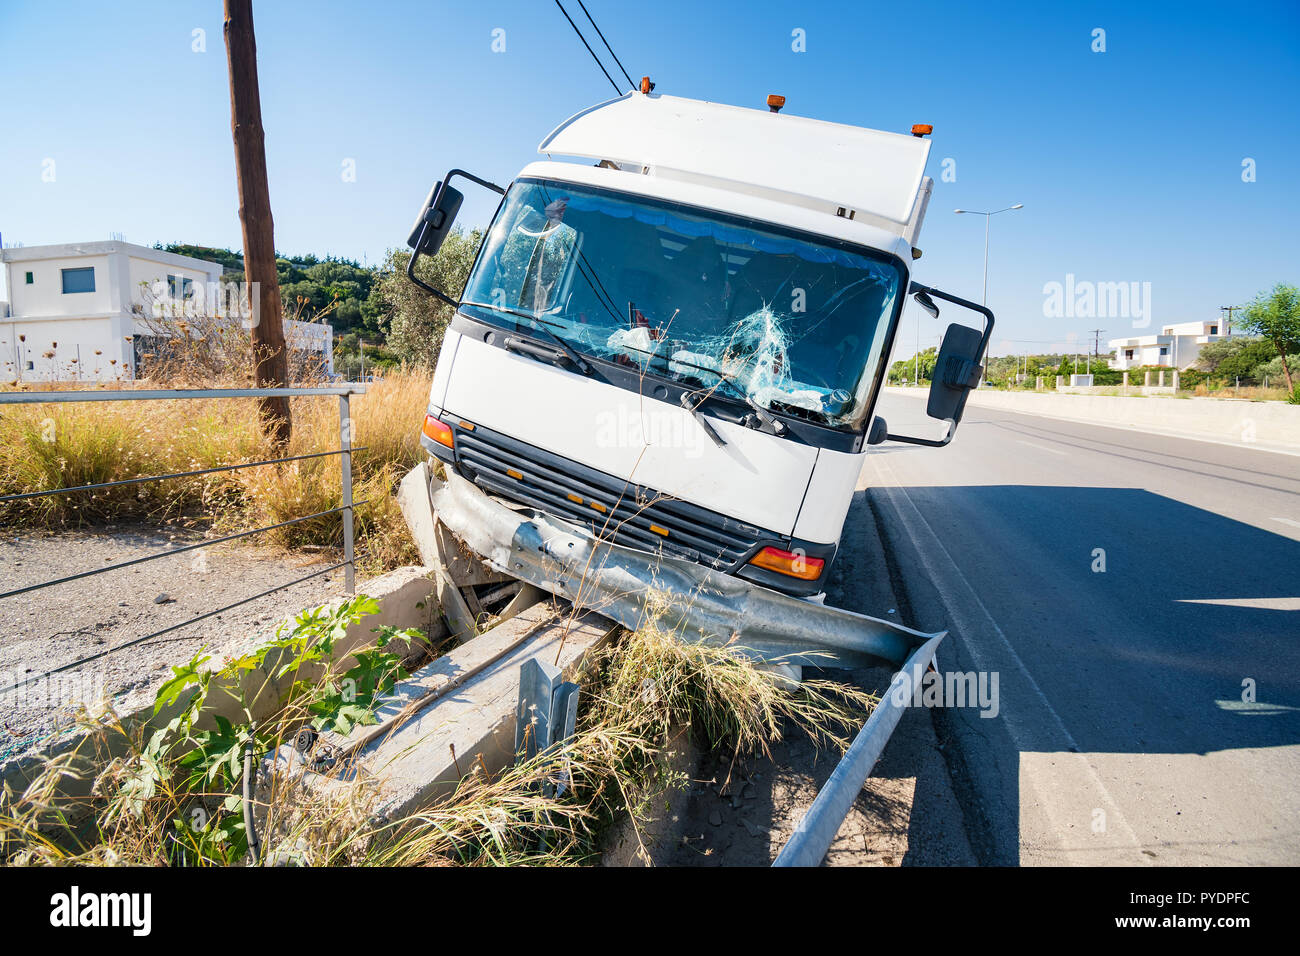 Front of crashed truck that hit crashed barrier on the road, broken windshield, sunny day Stock Photo